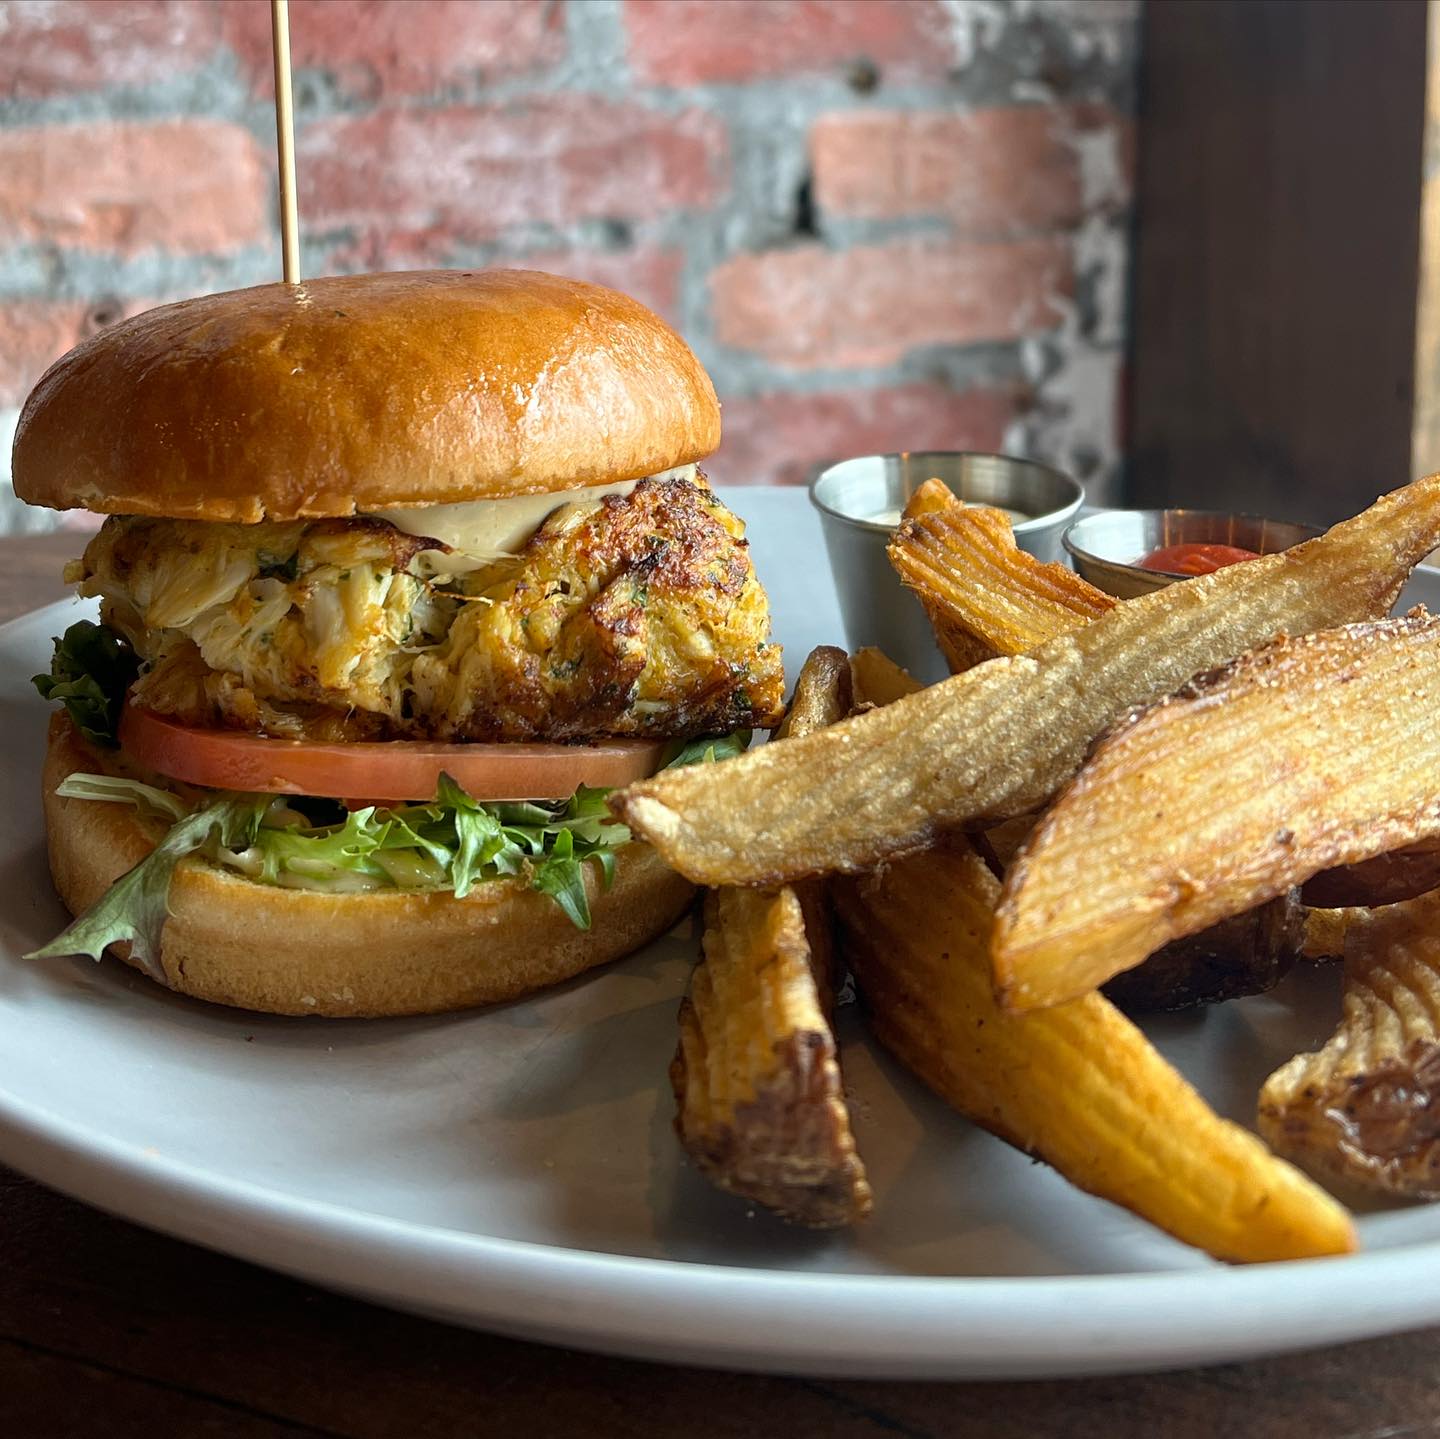 A crab cake sandwich with fries